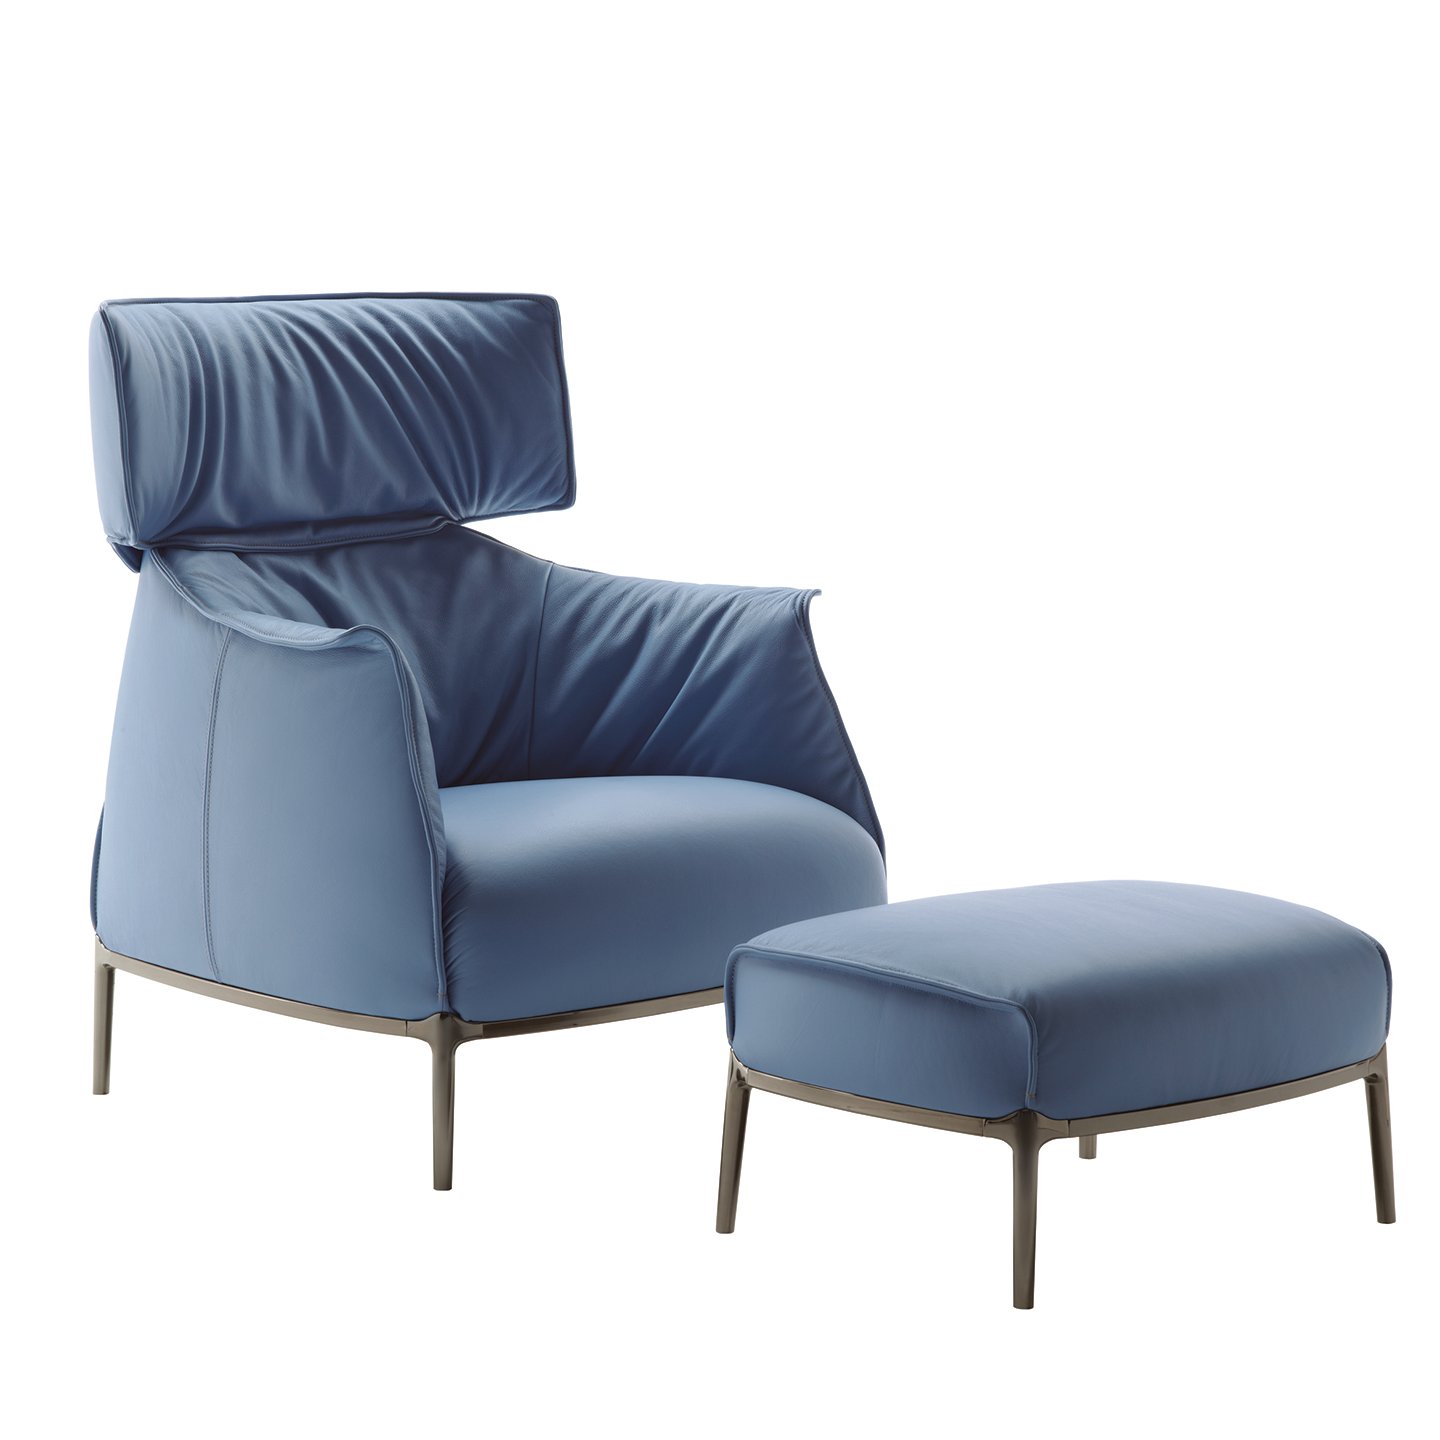 Haworth High Back Archibald lounge chair with ottoman in blue color